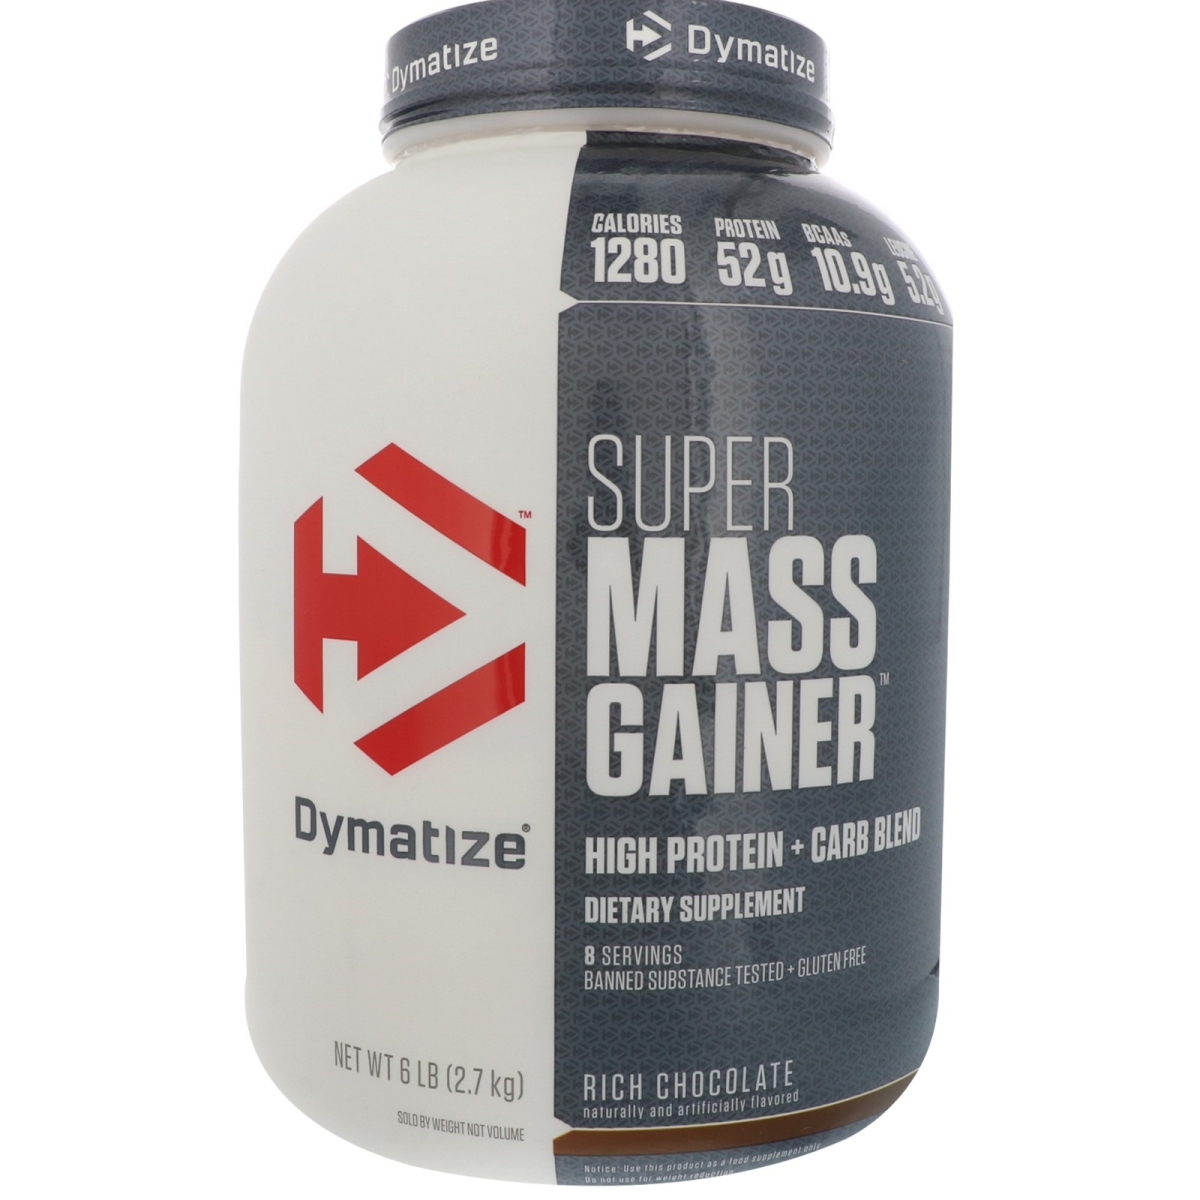 Europa Sports Products 2060435 Dymatize Super Mass Gainer, Rich Chocolate - 6 Lbs